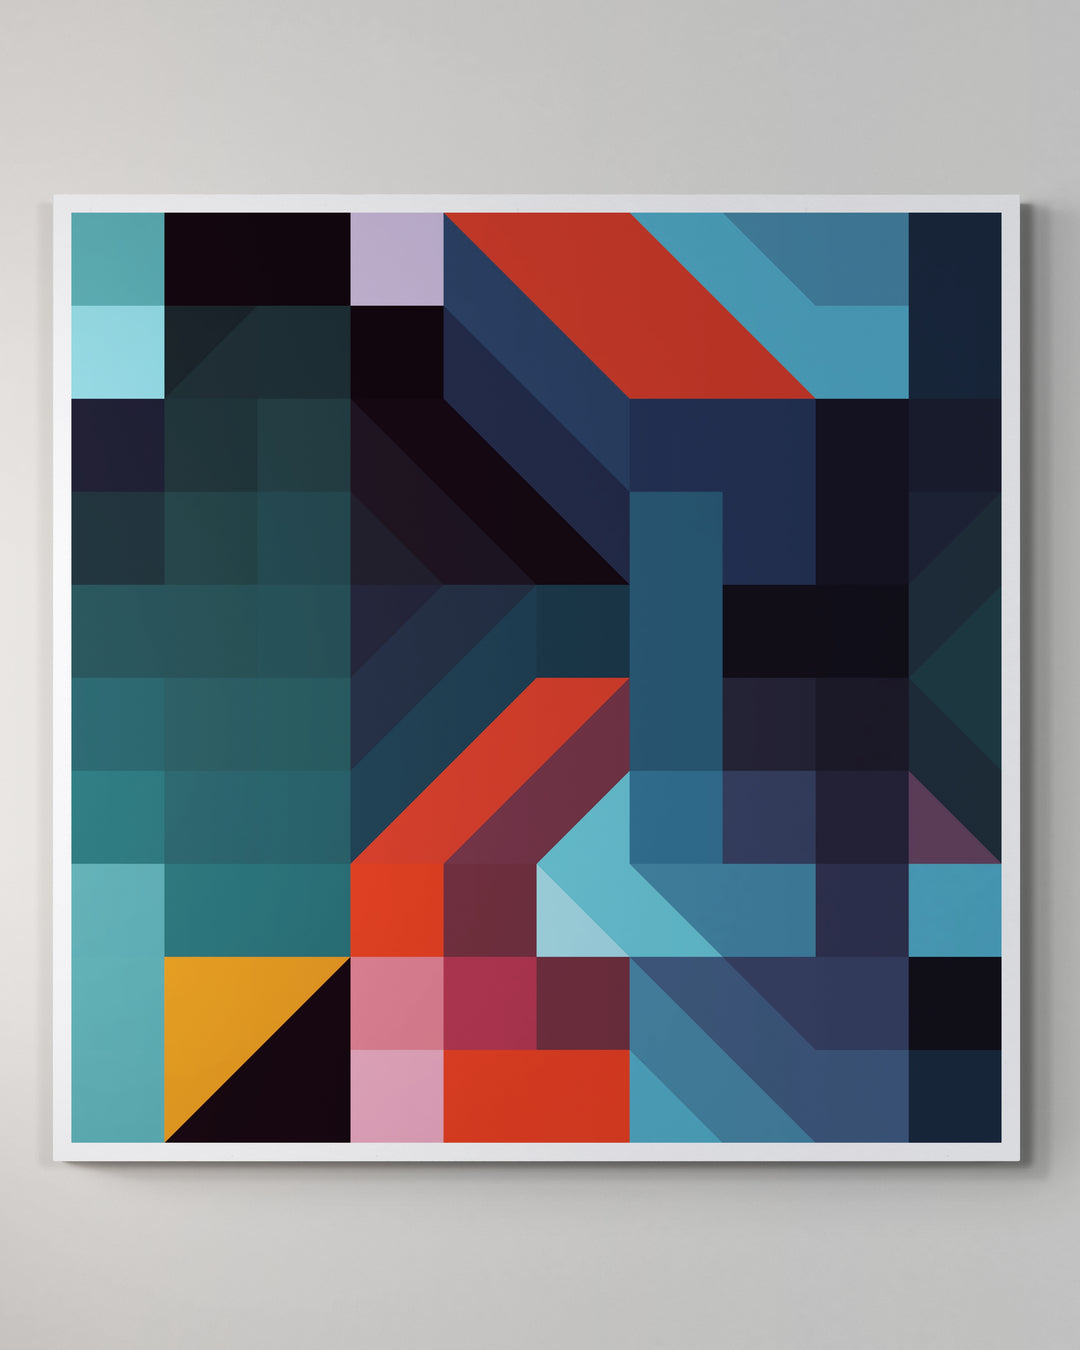 A giclée print of a colorful geometric digtal artwork on a white wall. Abstract cube and square patterns, mainly blues and red colors.